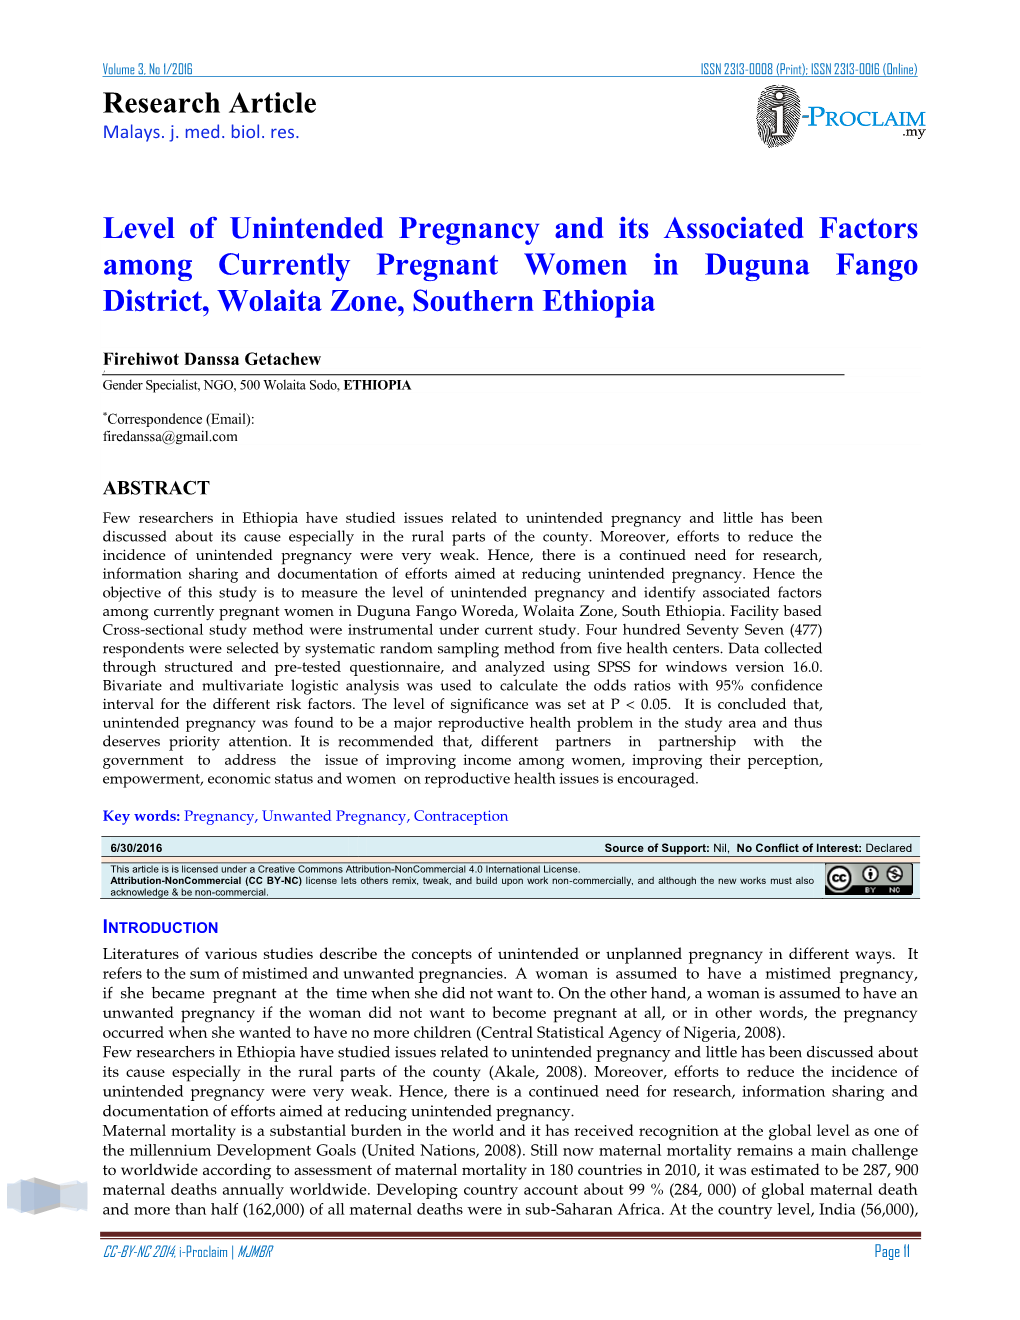 Level of Unintended Pregnancy and Its Associated Factors Among Currently Pregnant Women in Duguna Fango District, Wolaita Zone, Southern Ethiopia